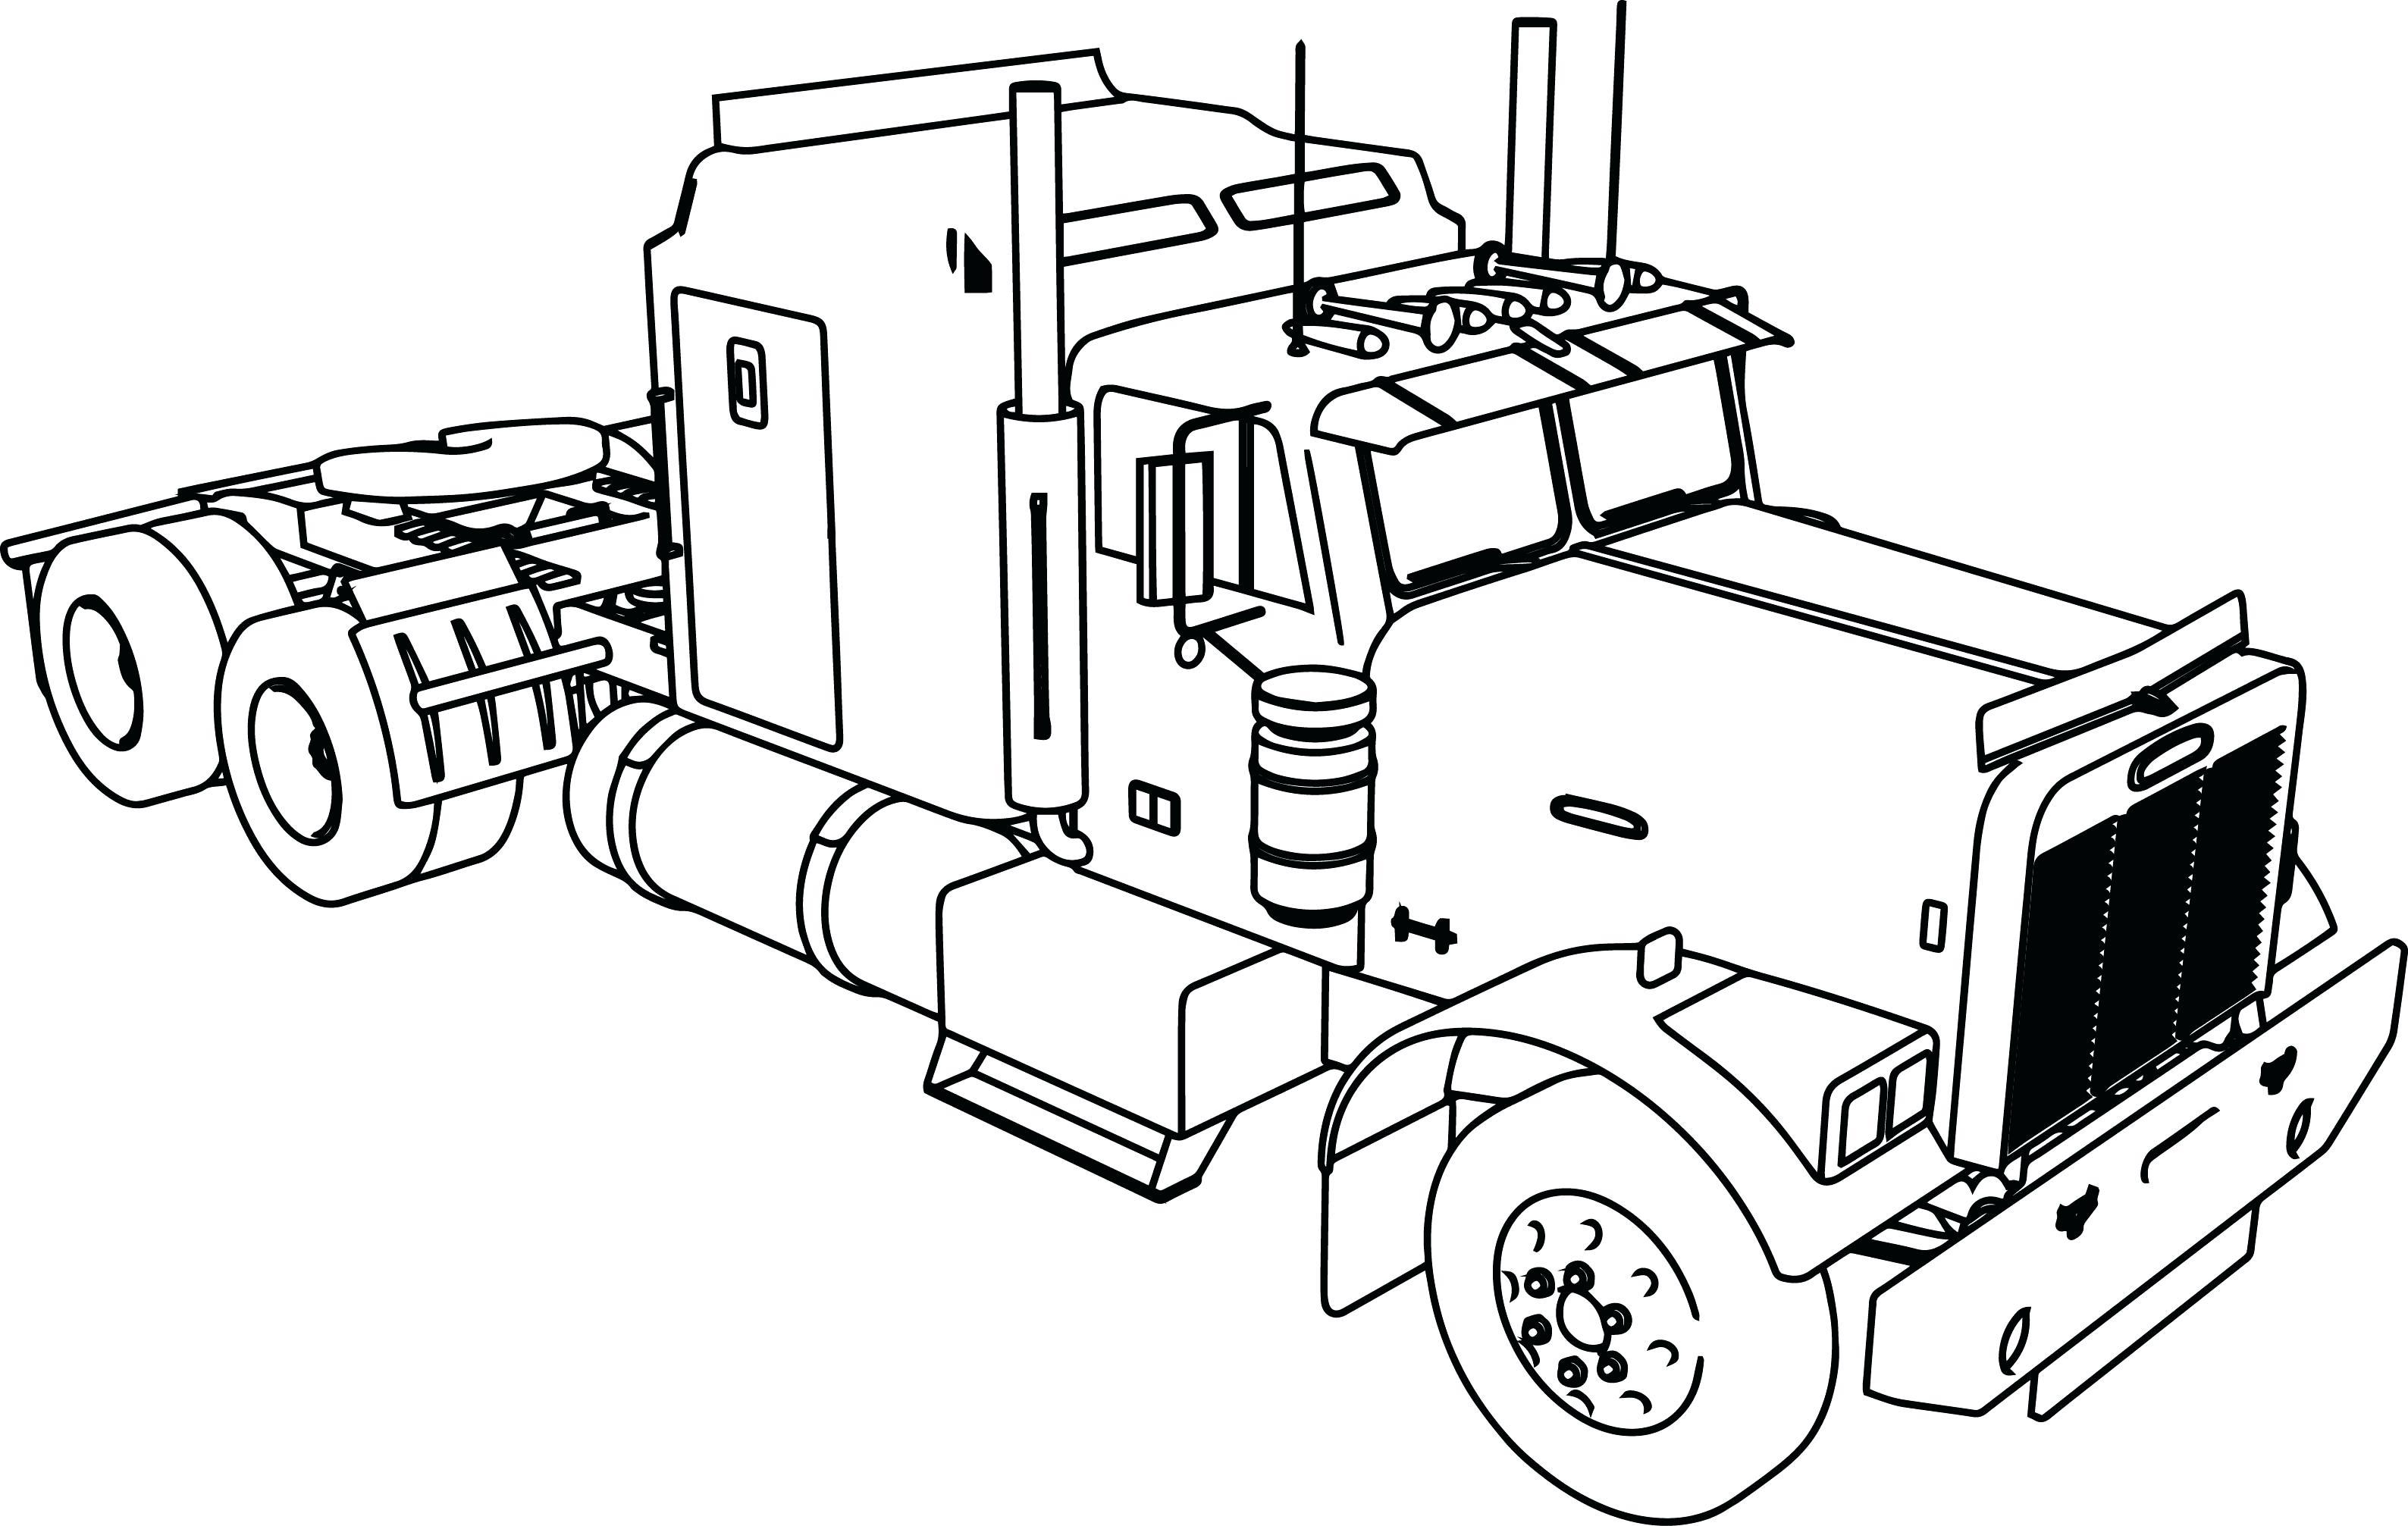 Farmall Tractor Coloring Pages at GetColoringscom Free